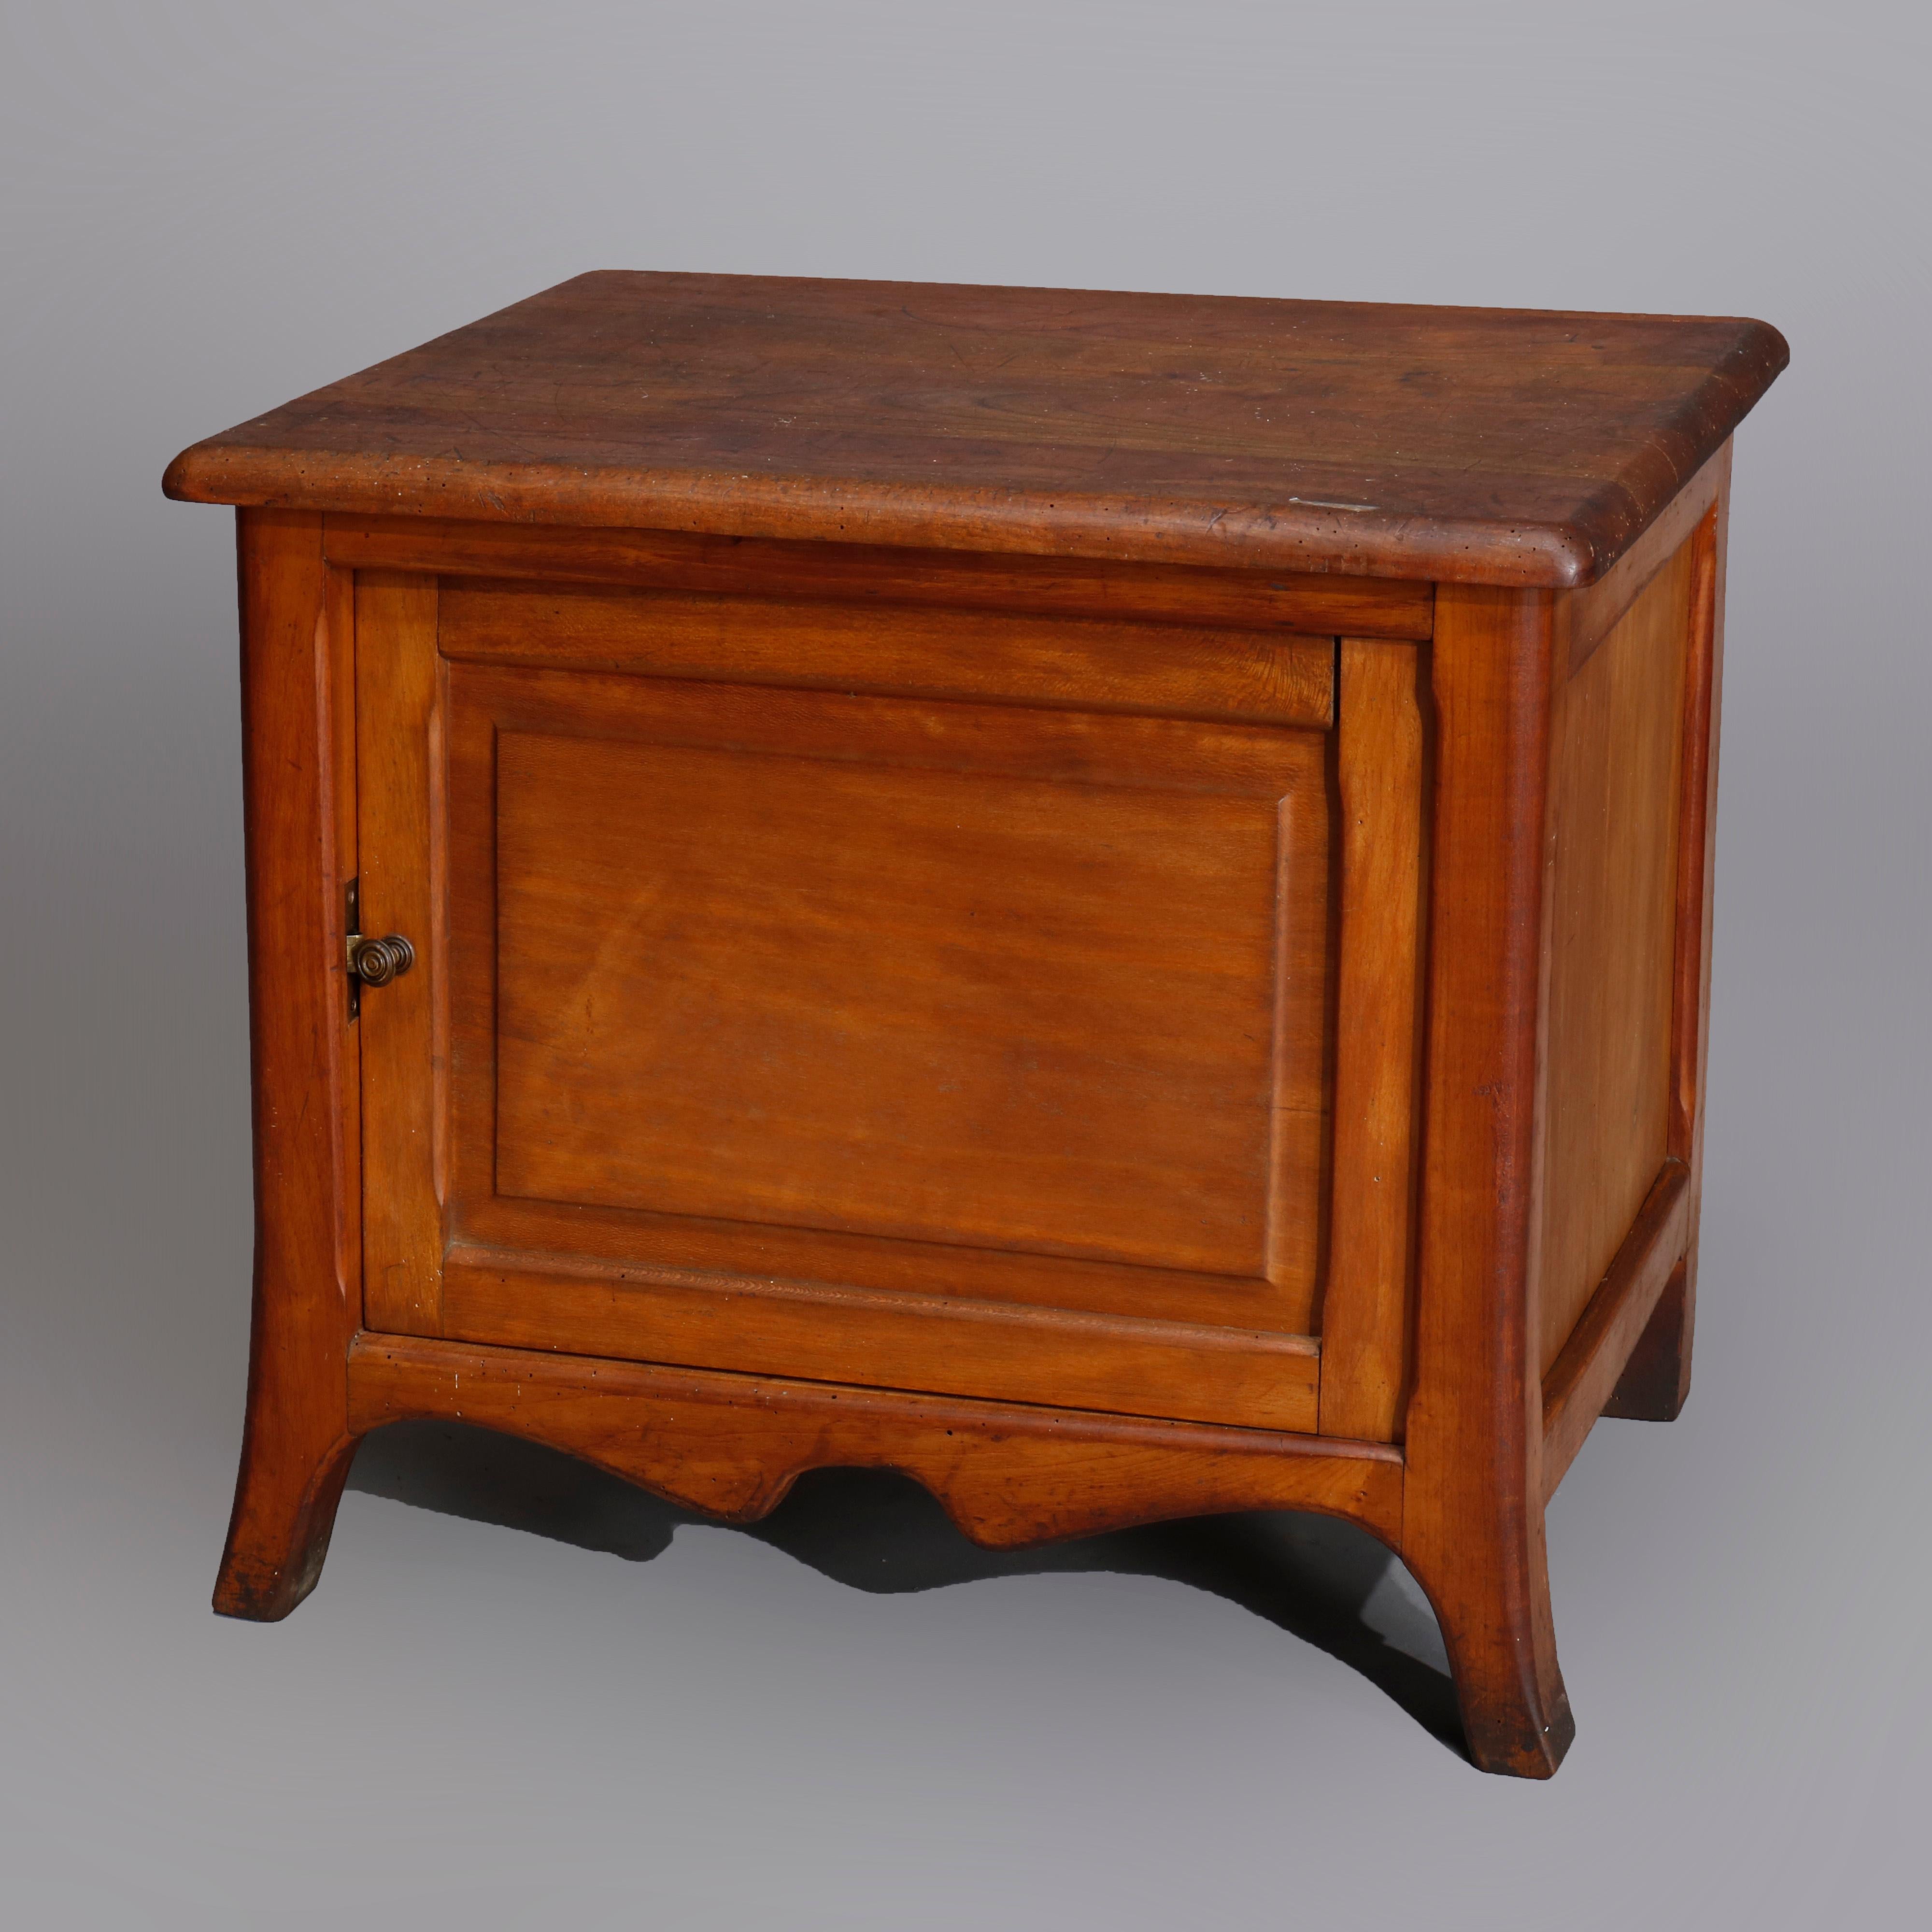 Vintage pair of maple box form single door side stands with raised panels, shaped skirt and raised on tapered and flared feet, interior storage cabinets, 20th century

Measures: 20.5